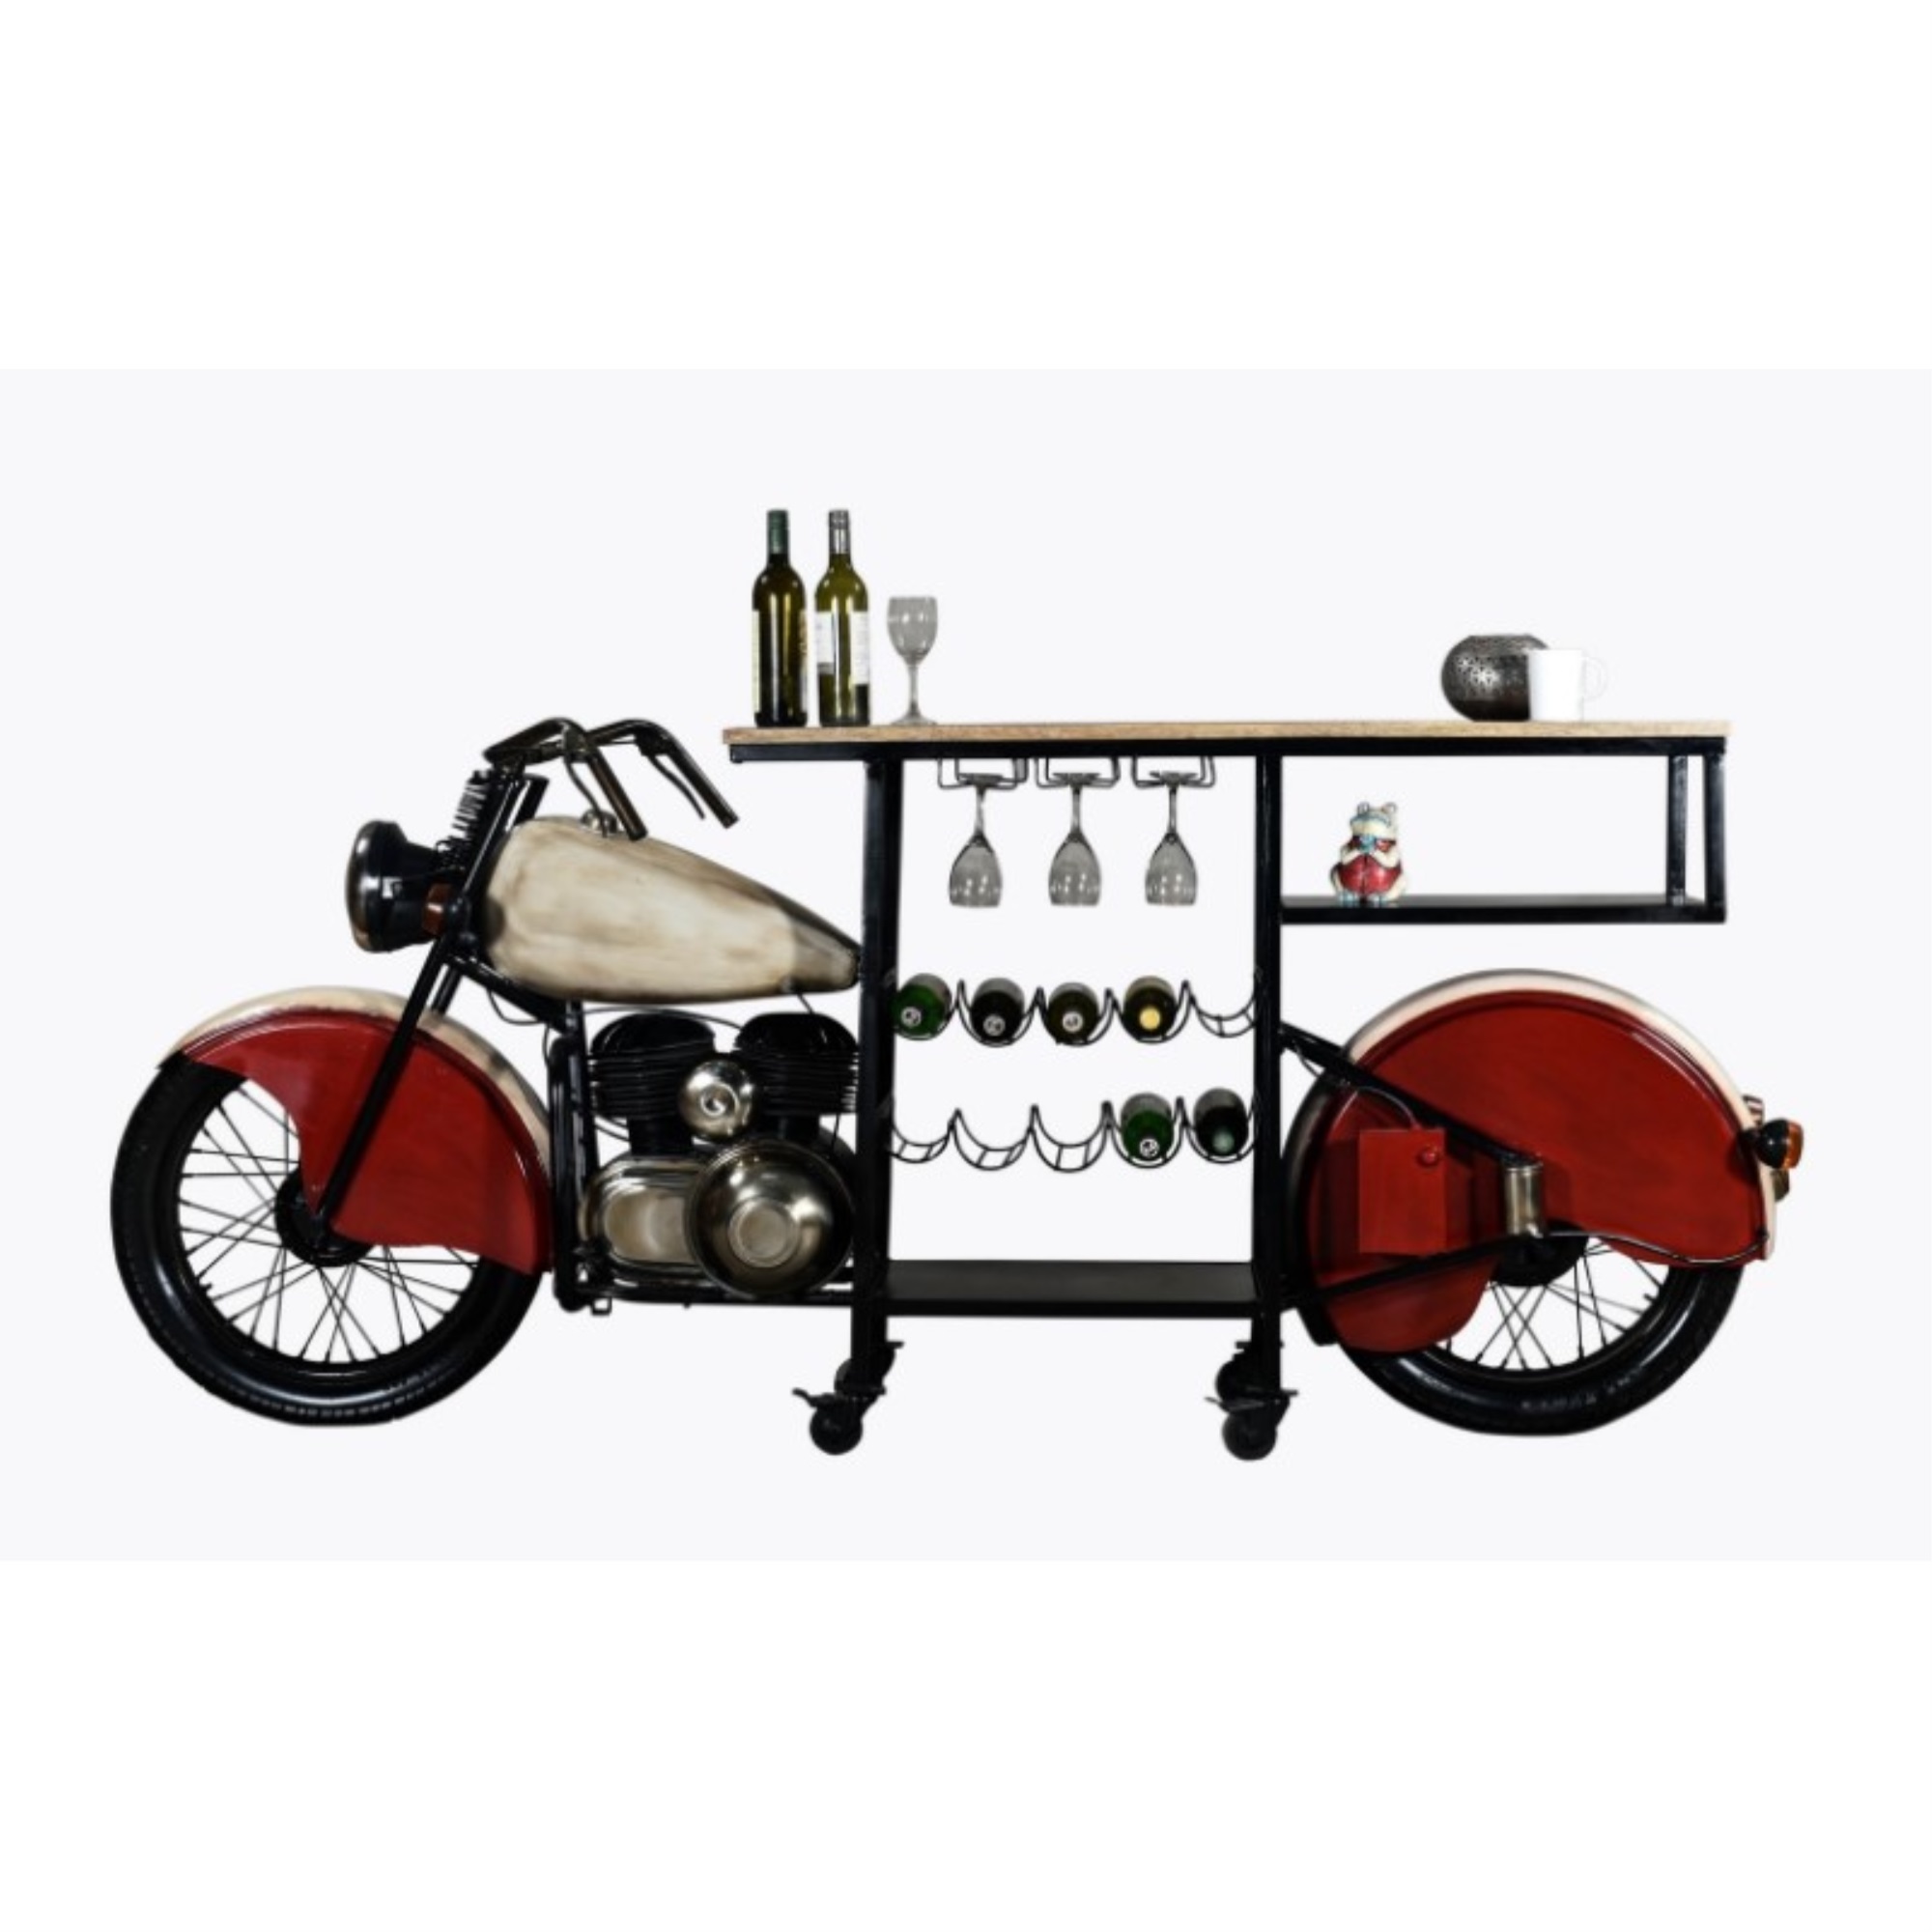 18" X 93" X 39" Red and White Motorcycle Wine Bar